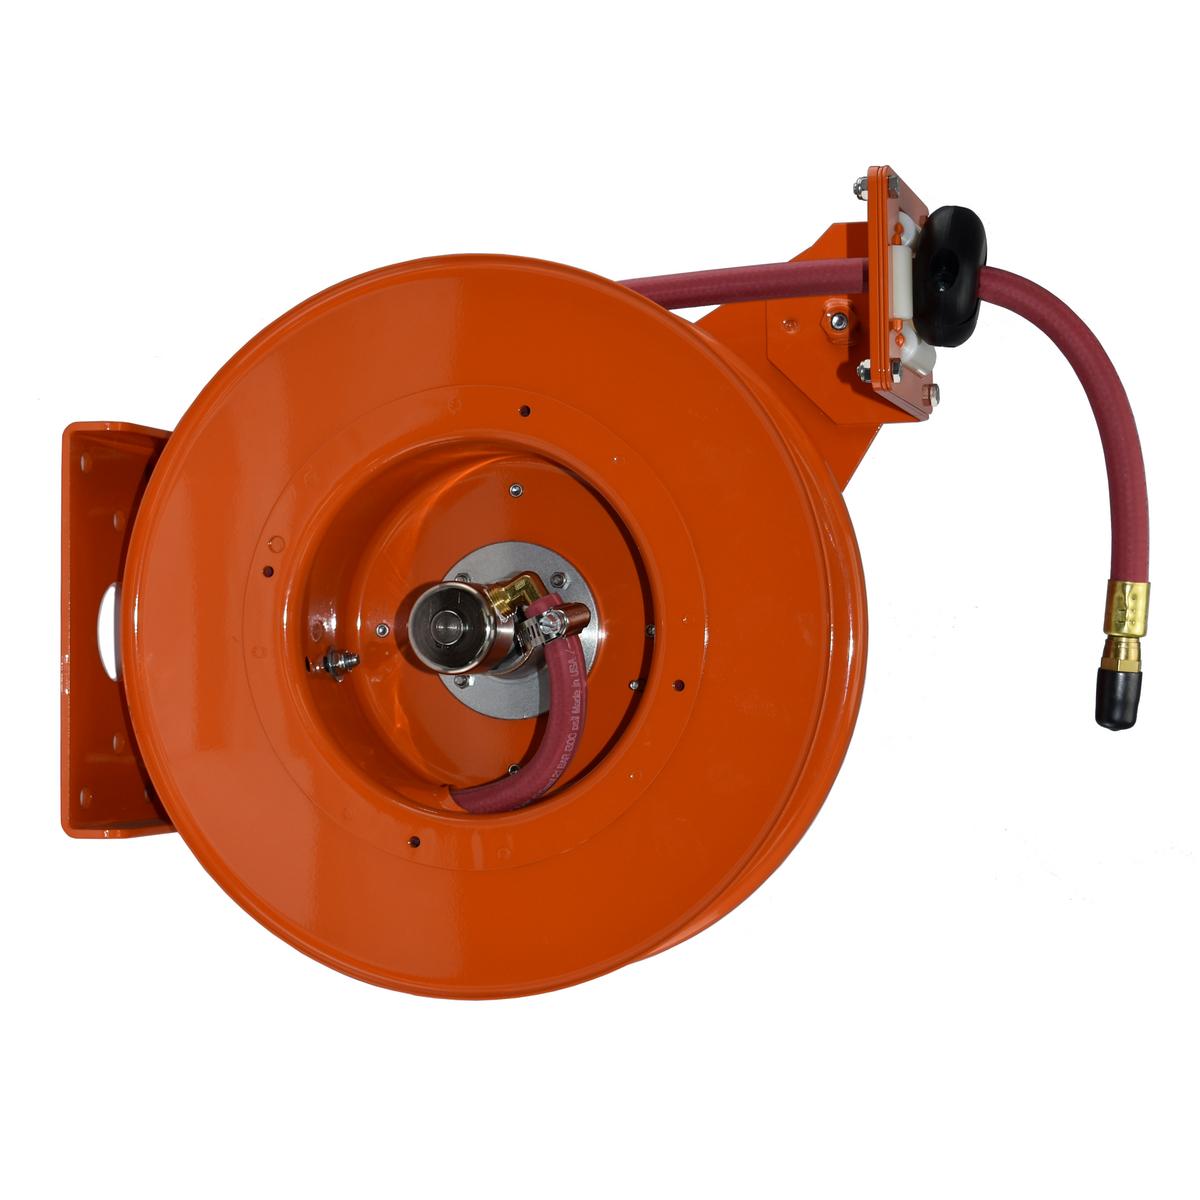 Hubbell HM143-8-P3 The Gleason Hose-Master hose reel is the most rugged single hose, general purpose hose reel of its size in the industry. We created it with the most demanding hose reeling applications in mind, hand pull or machine mounted. Oversized bearings and a heavy 